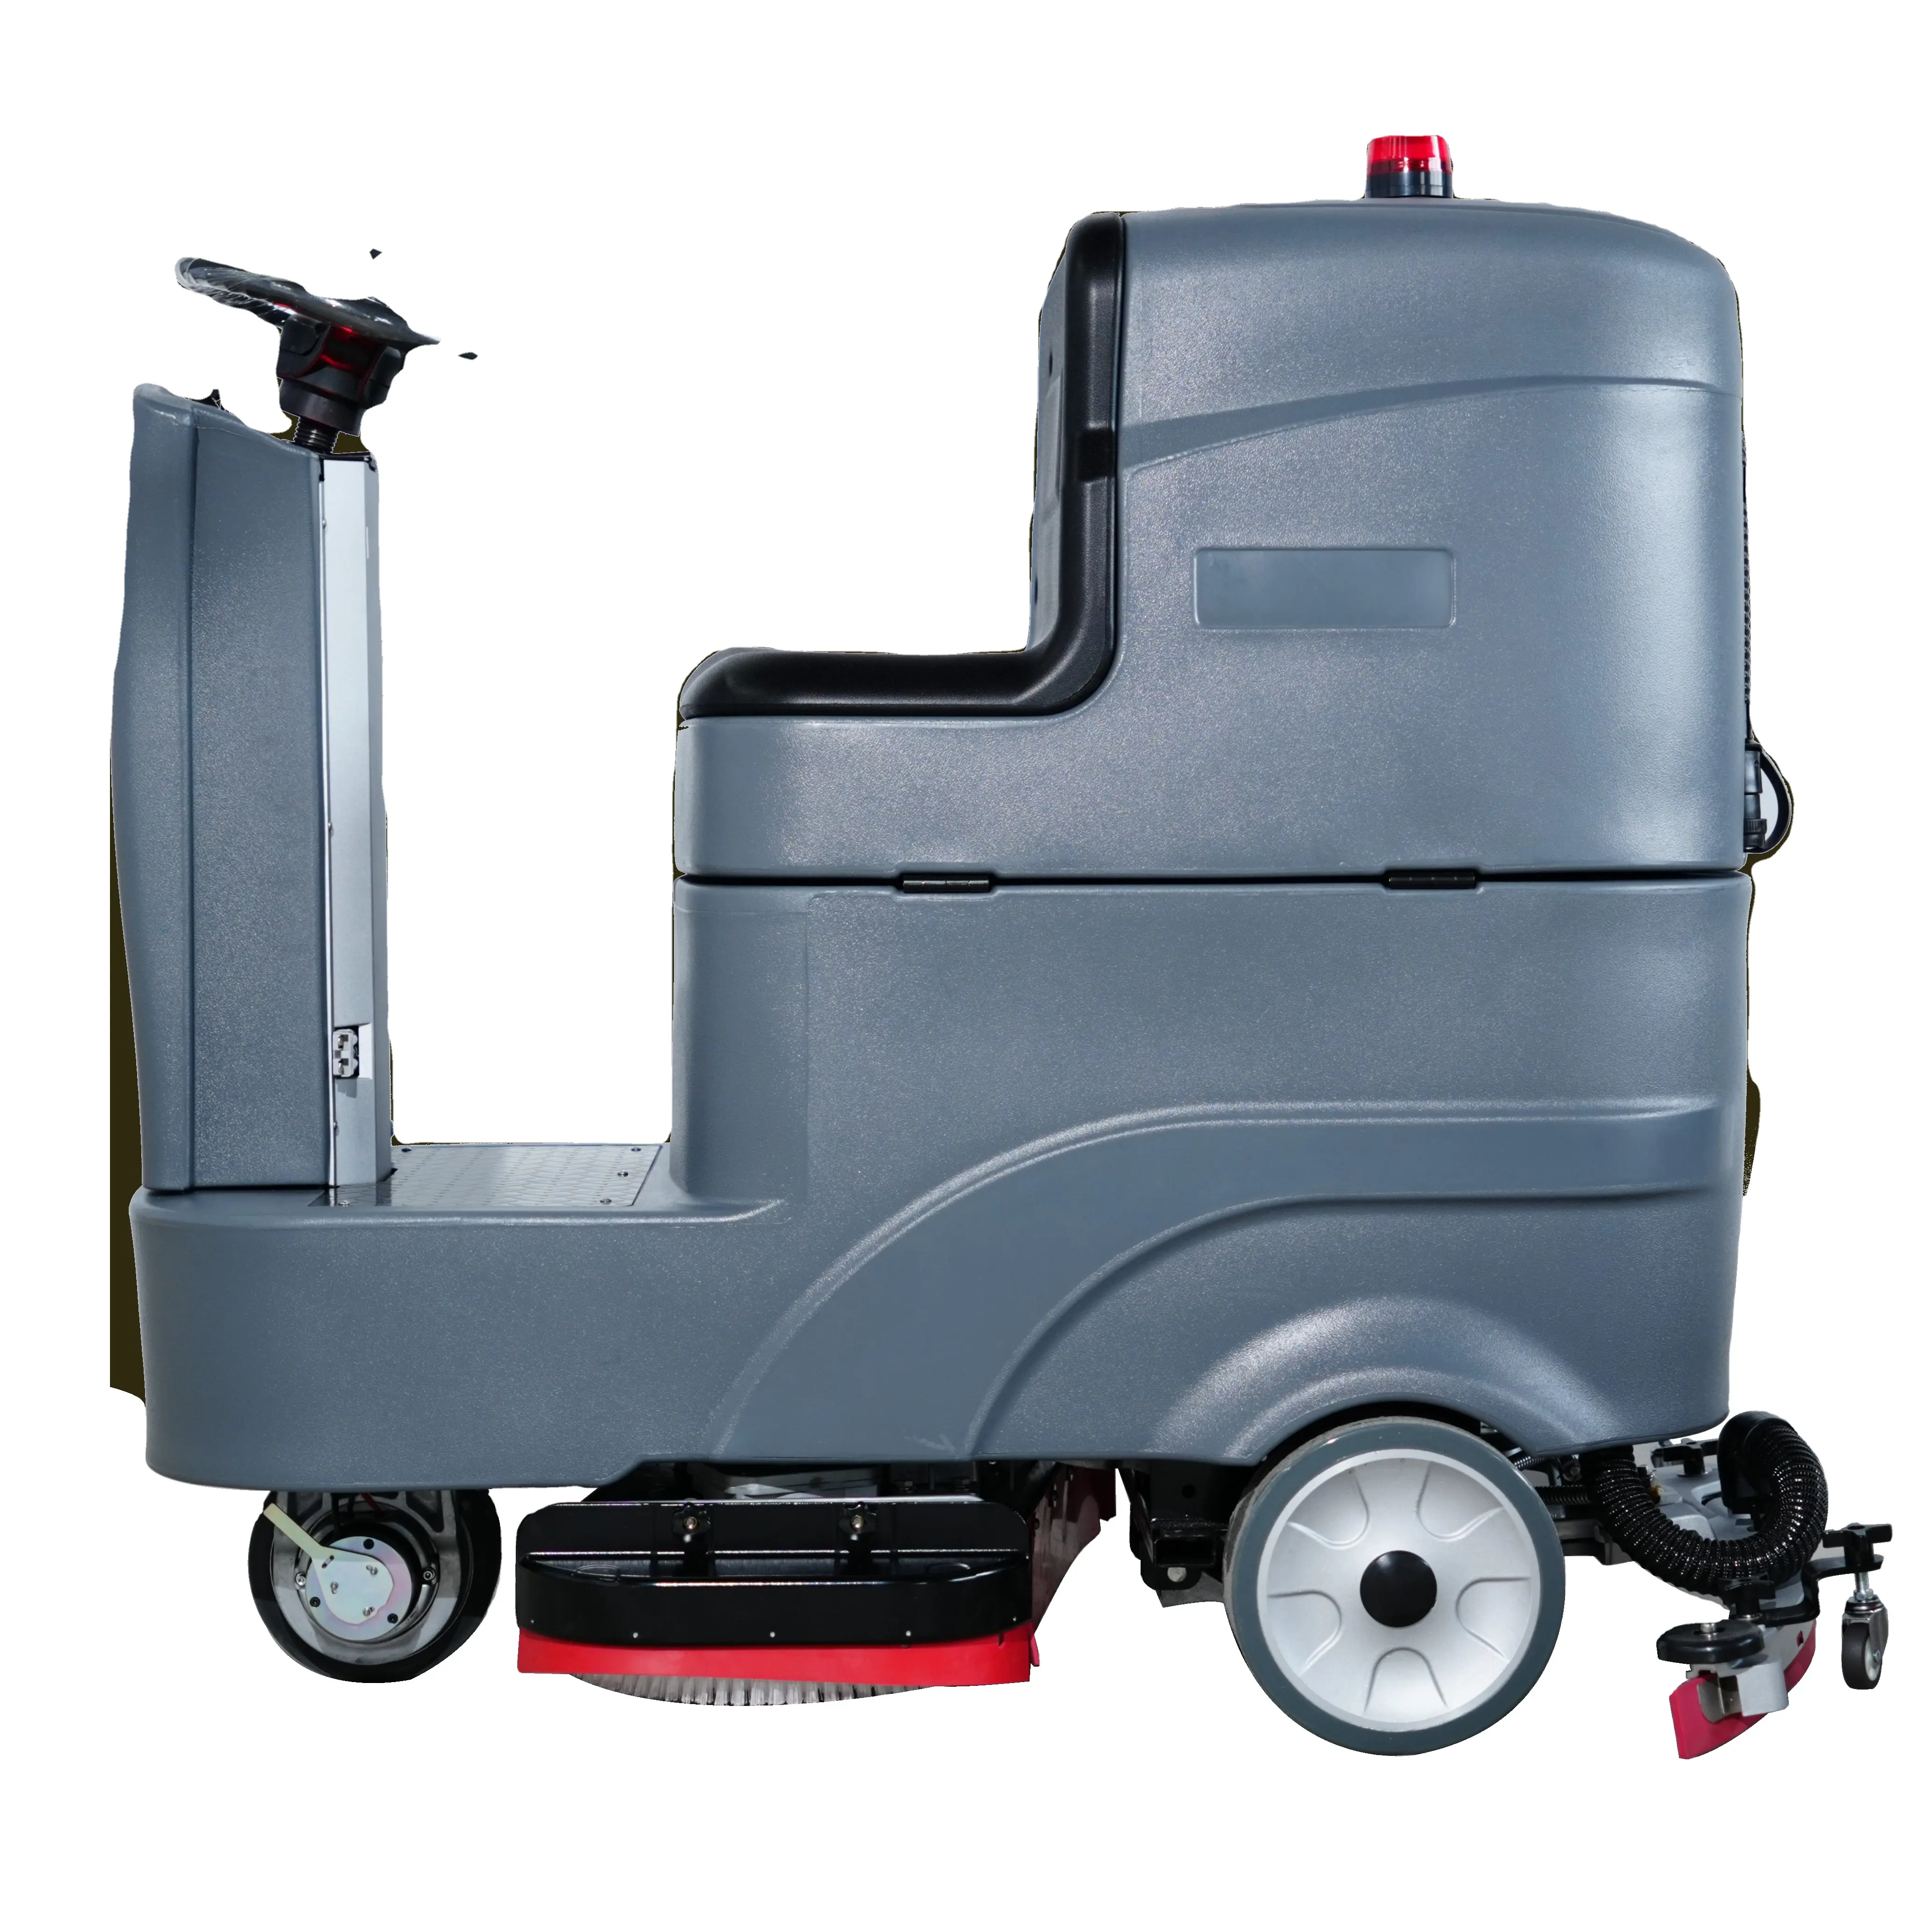 A660 Hot Selling Strong Suction ride-on commercial automatic floor washing cleaning Scrubber machine